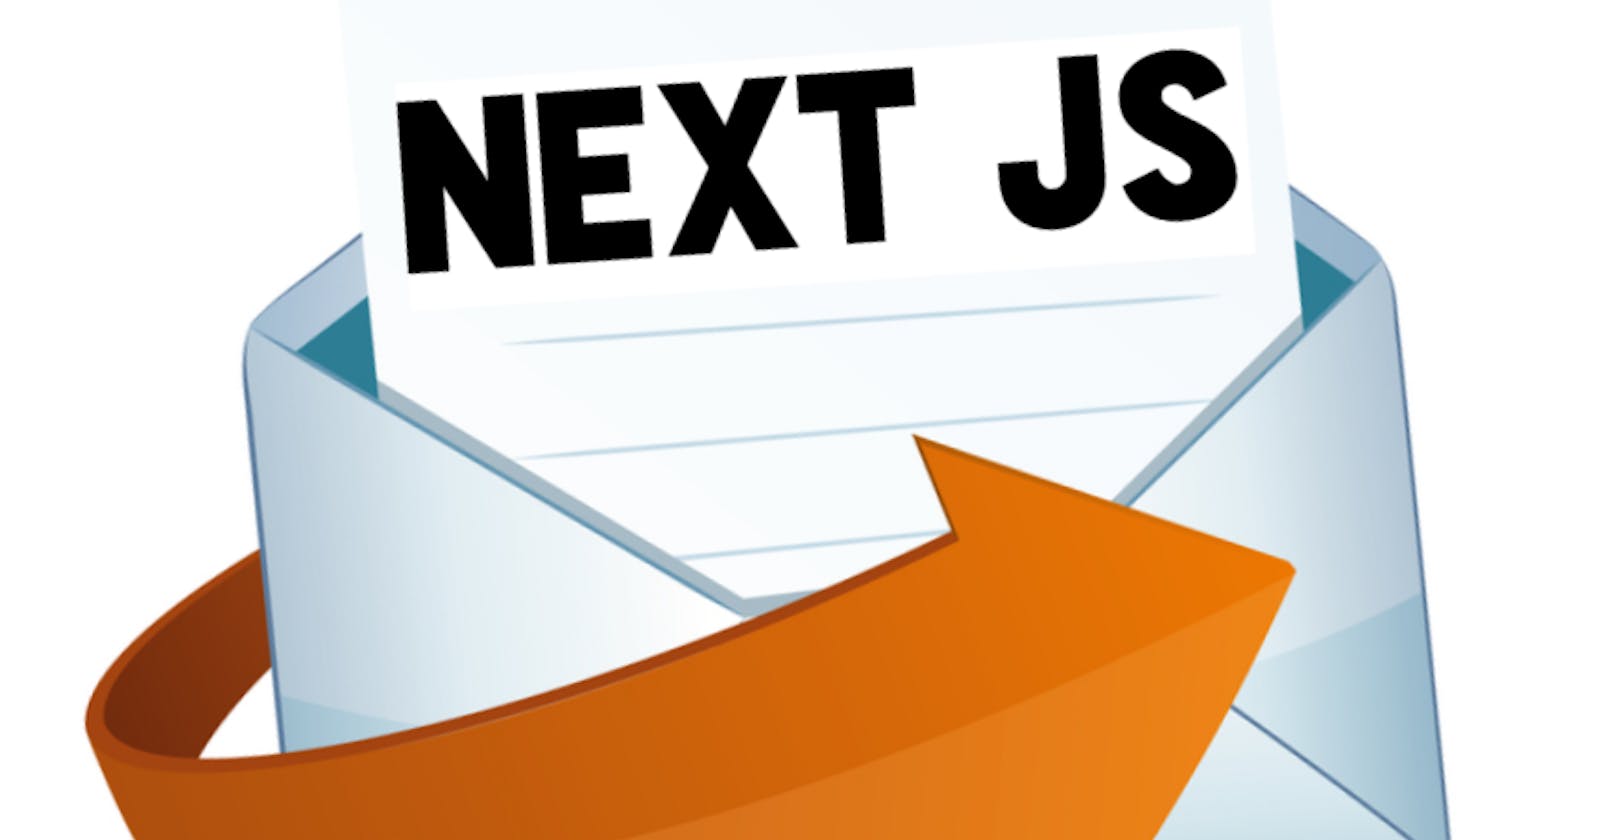 How to Send Emails from NextJs Using Resend.